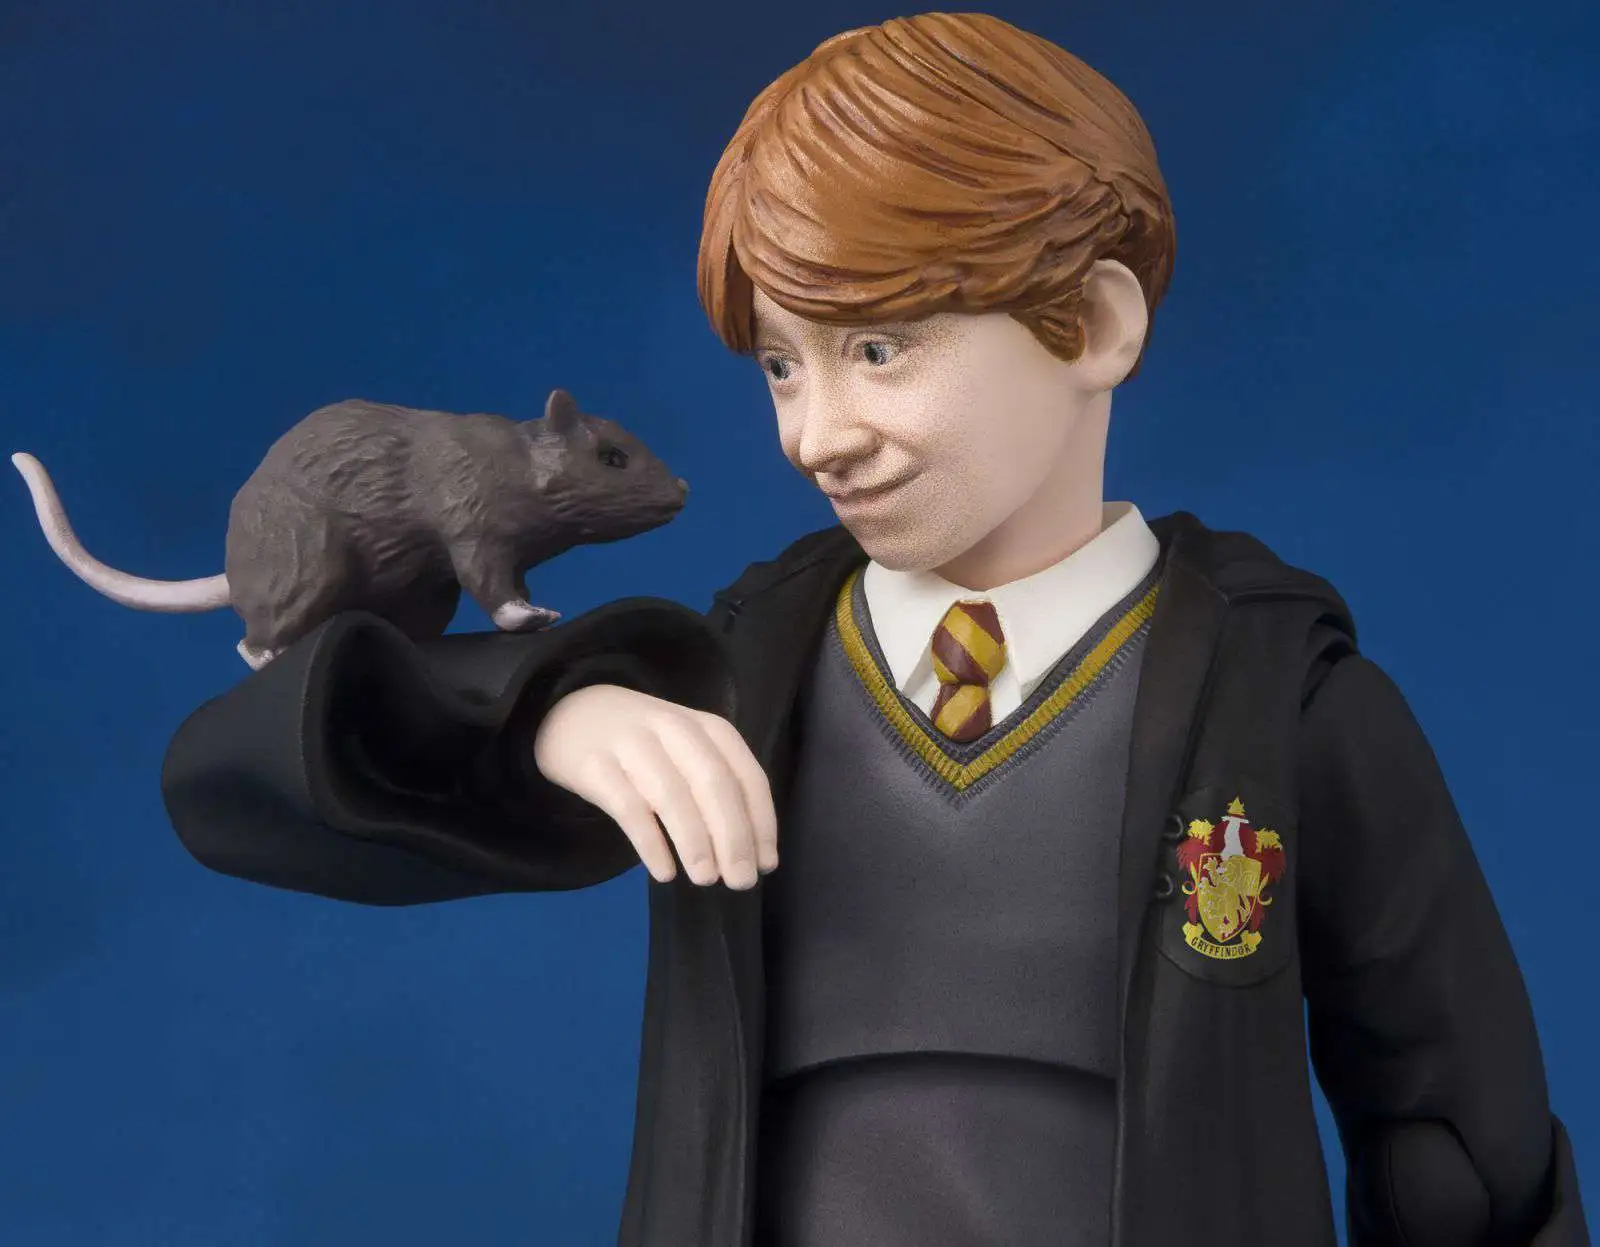 S.h.figuarts Harry Potter Stone Ron Weasley Bandai BAS55109 for sale online 